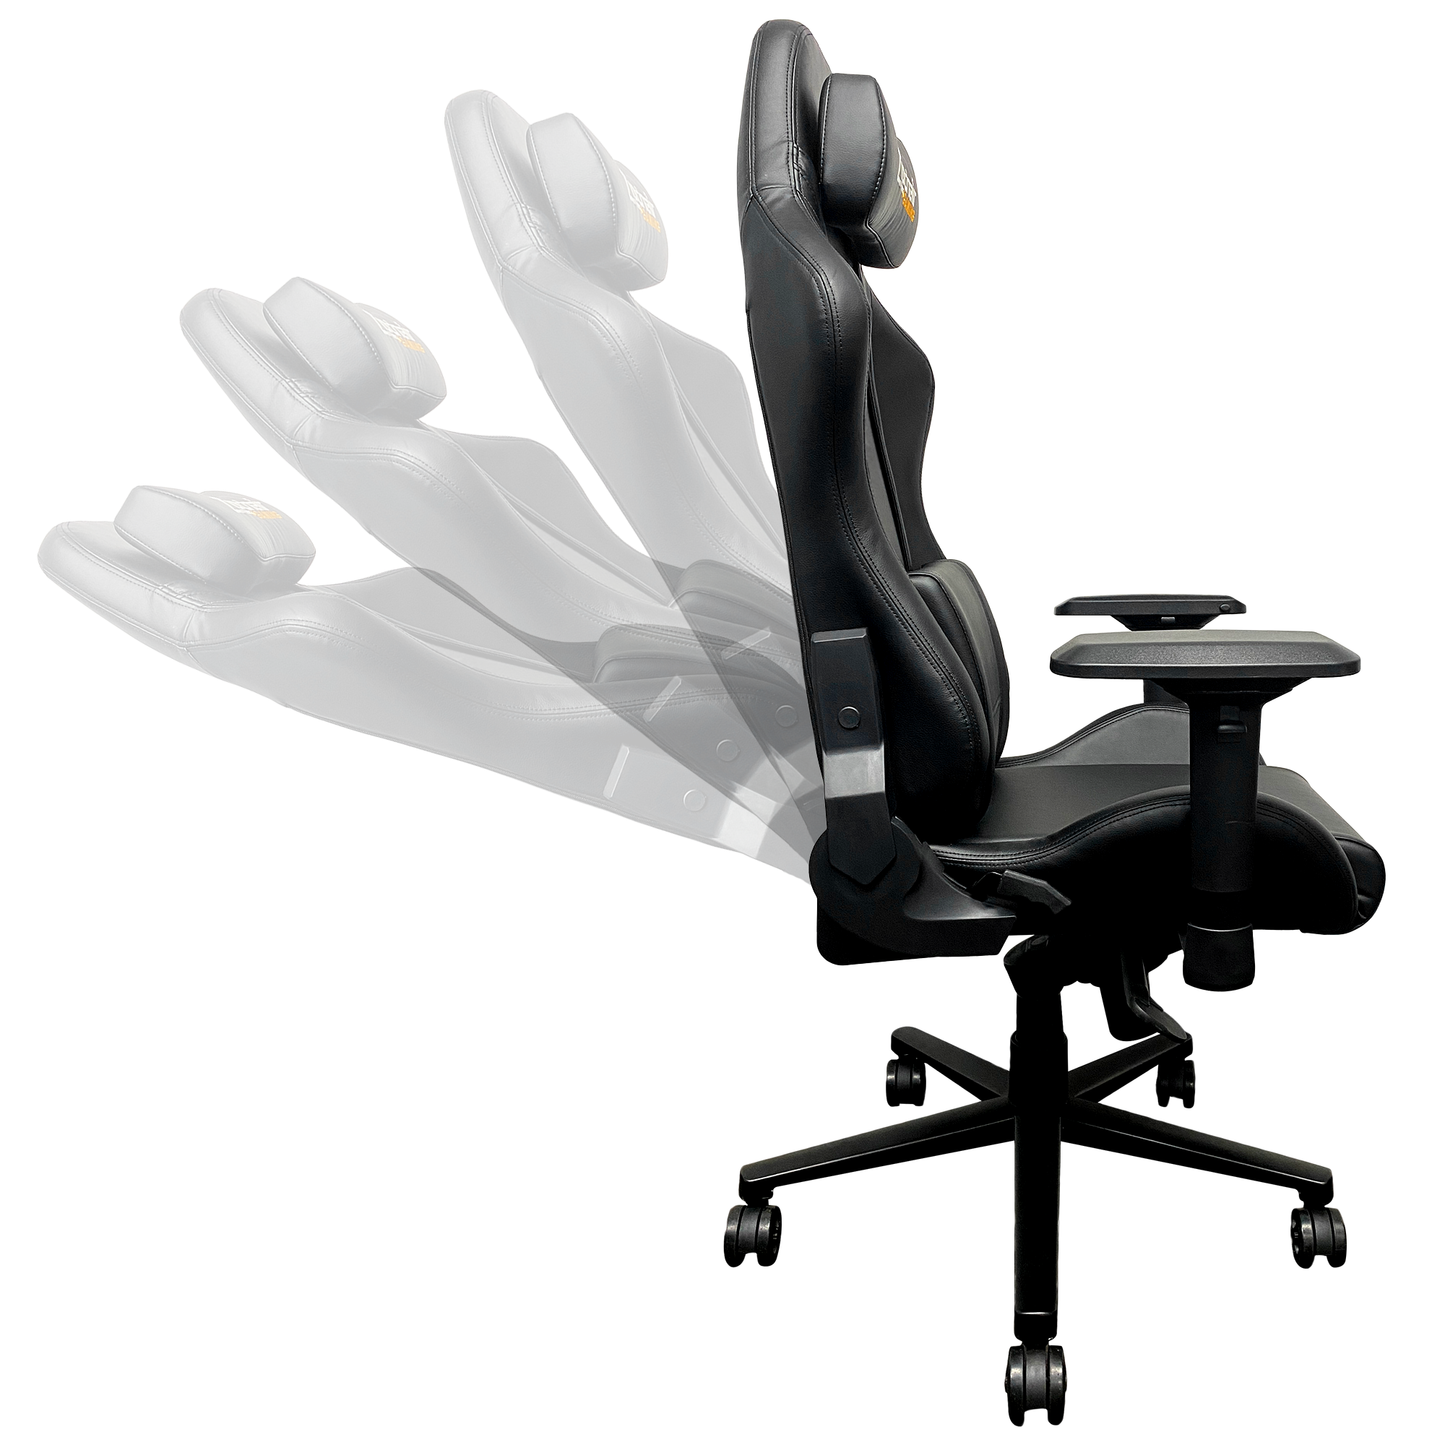 Xpression Pro Gaming Chair with North Carolina State Wolf Logo